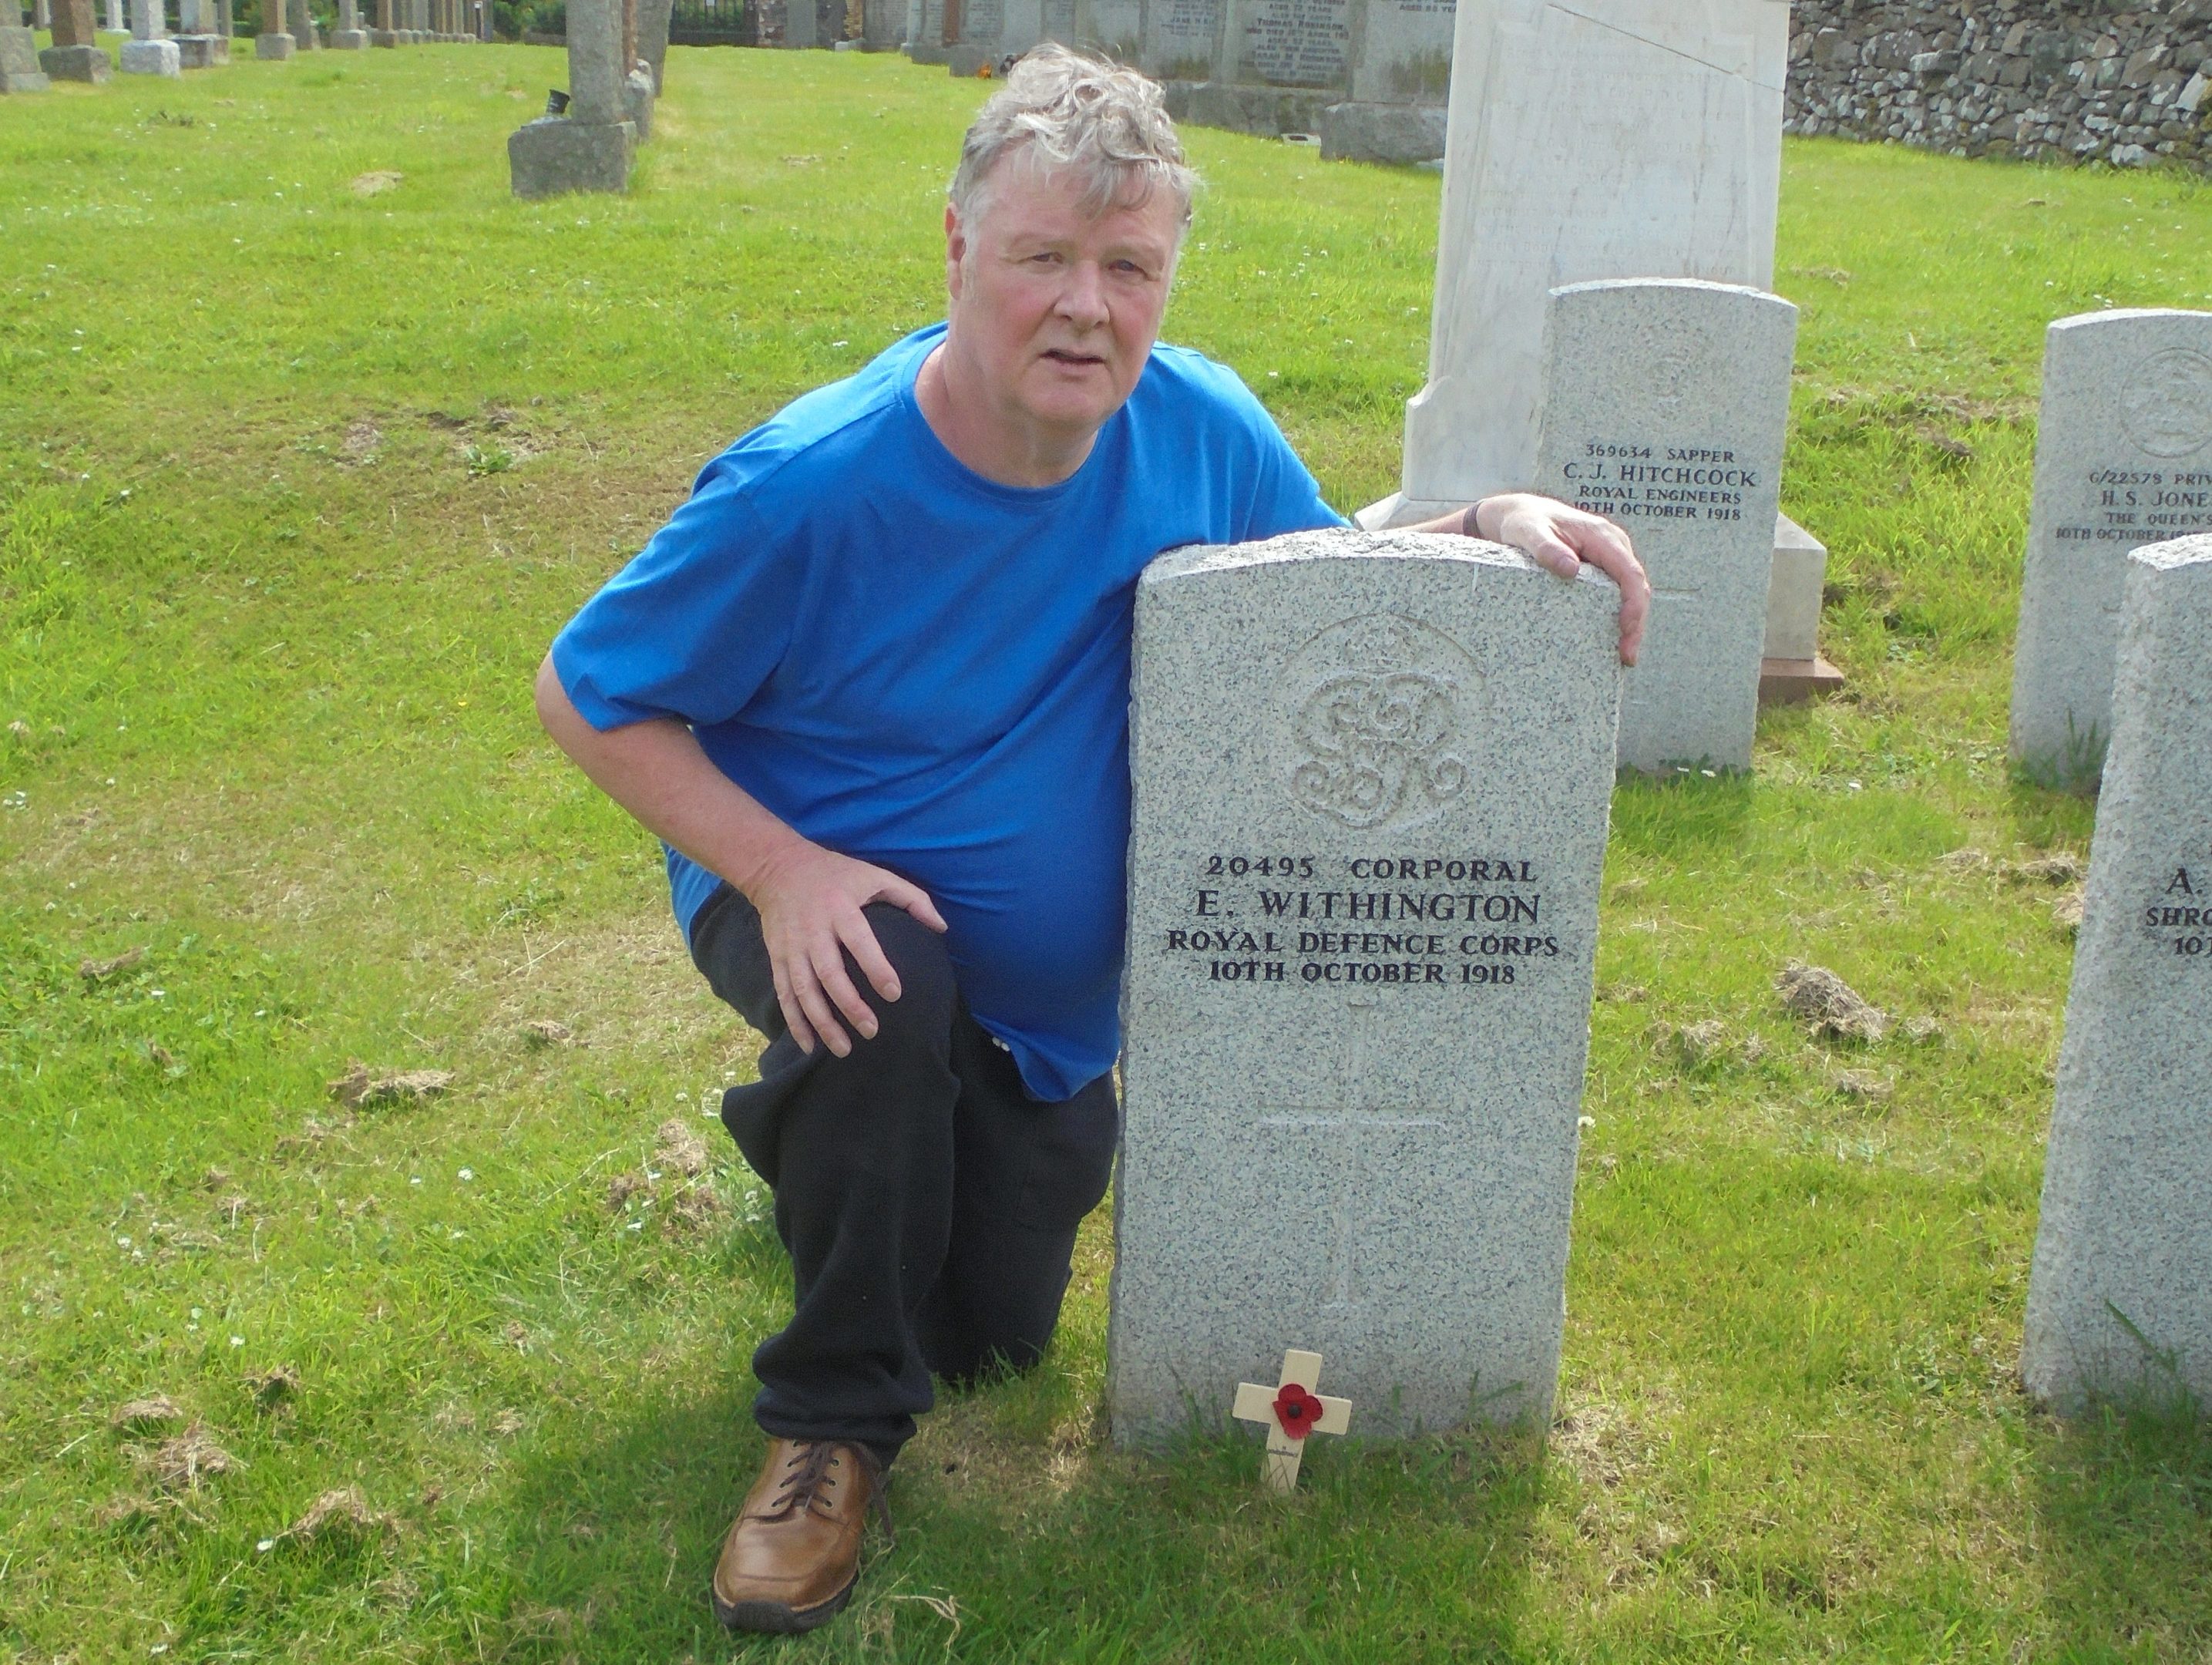 Patrick Anderson, a keen historian from Letham, laid a poppy cross at the grave of Corporal Charles Edward Withington at St Cuthbert’s Old Churchyard in Kirkcudbright